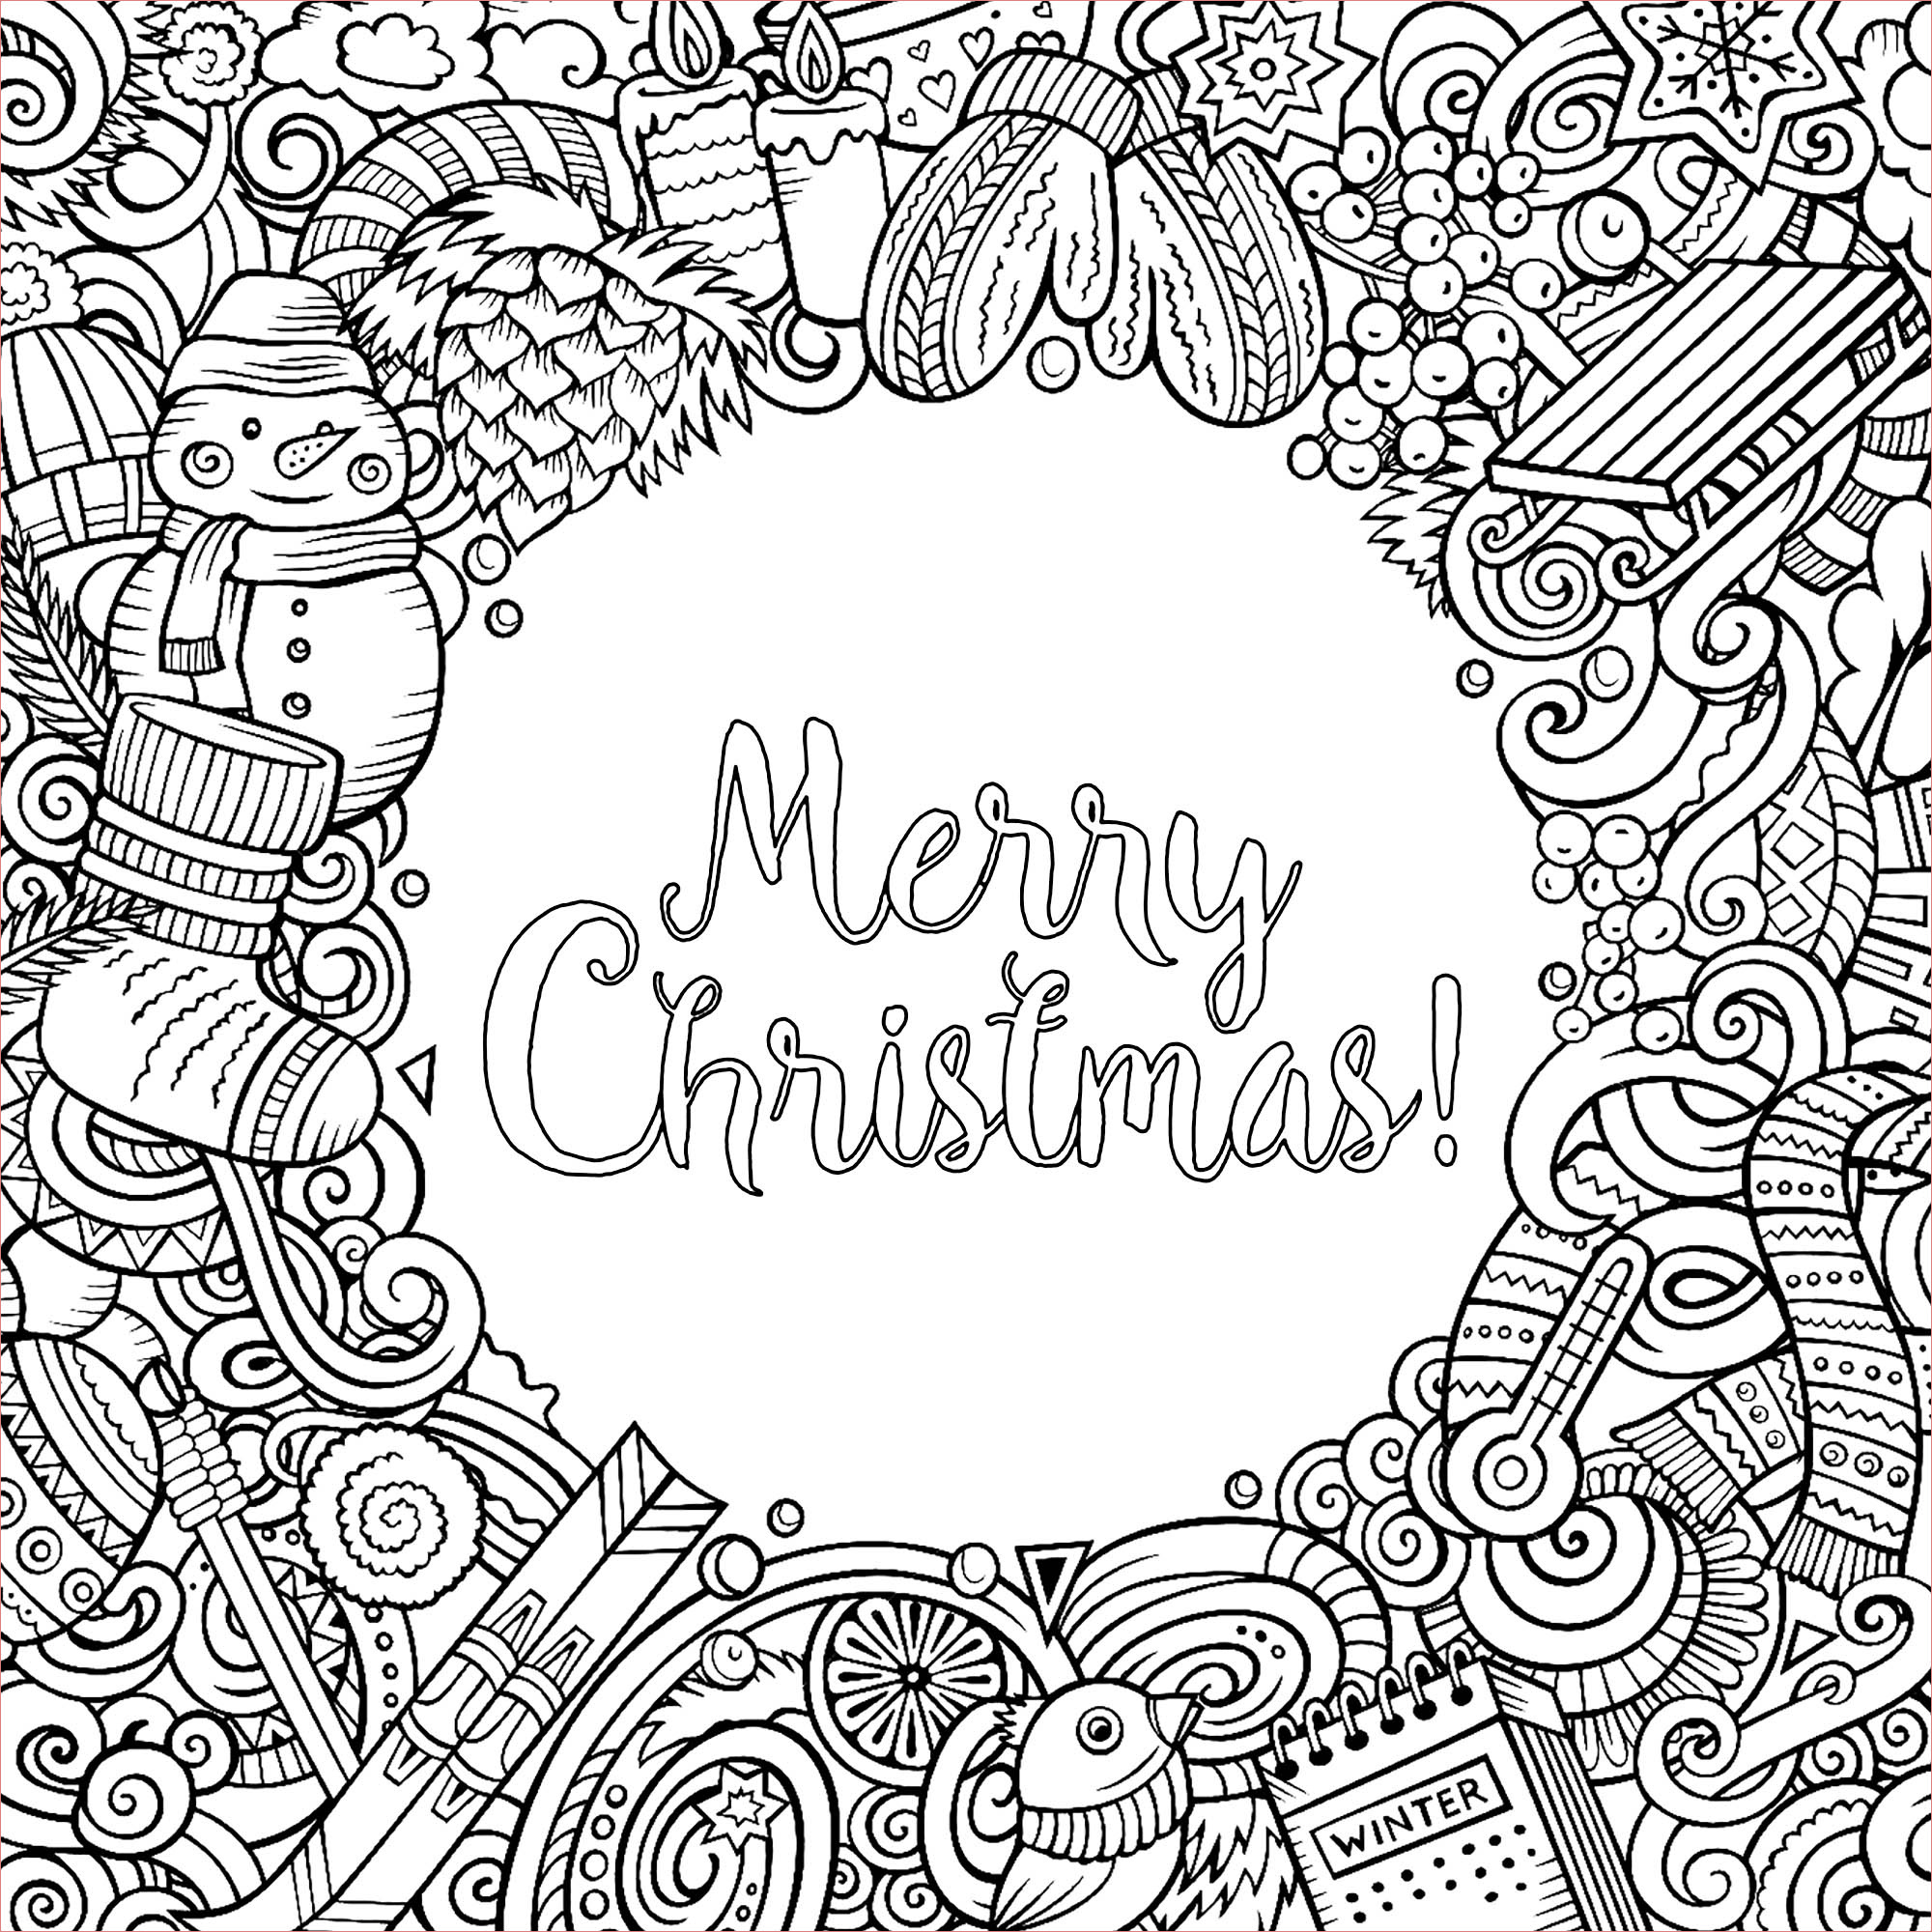 image=events christmas coloring merry christmas doodles with text 1